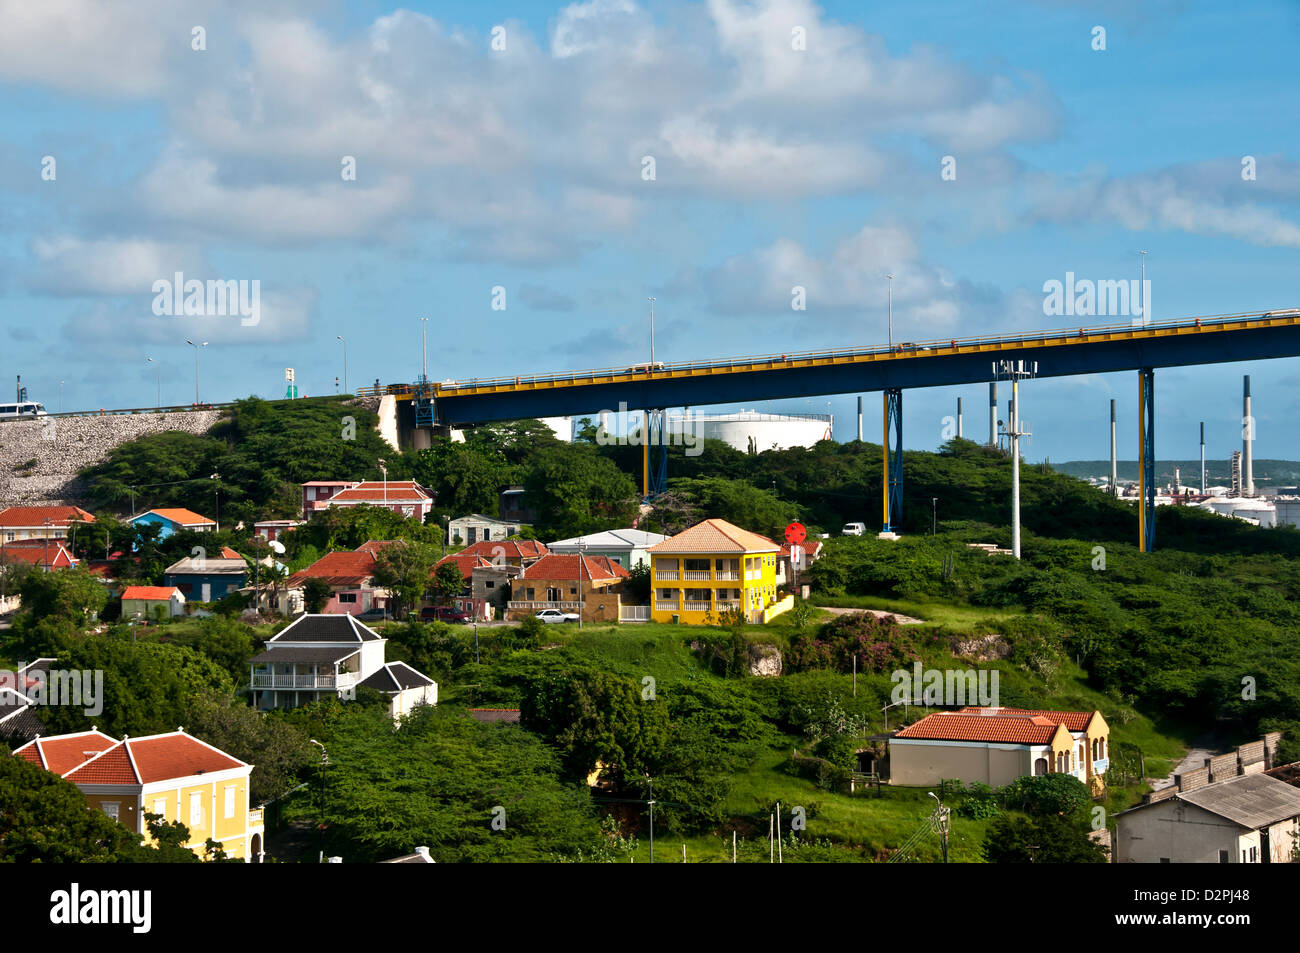 Queen Juliana Bridge carries traffic across St. Anna Bay channel at Willemstad, Curacao Stock Photo